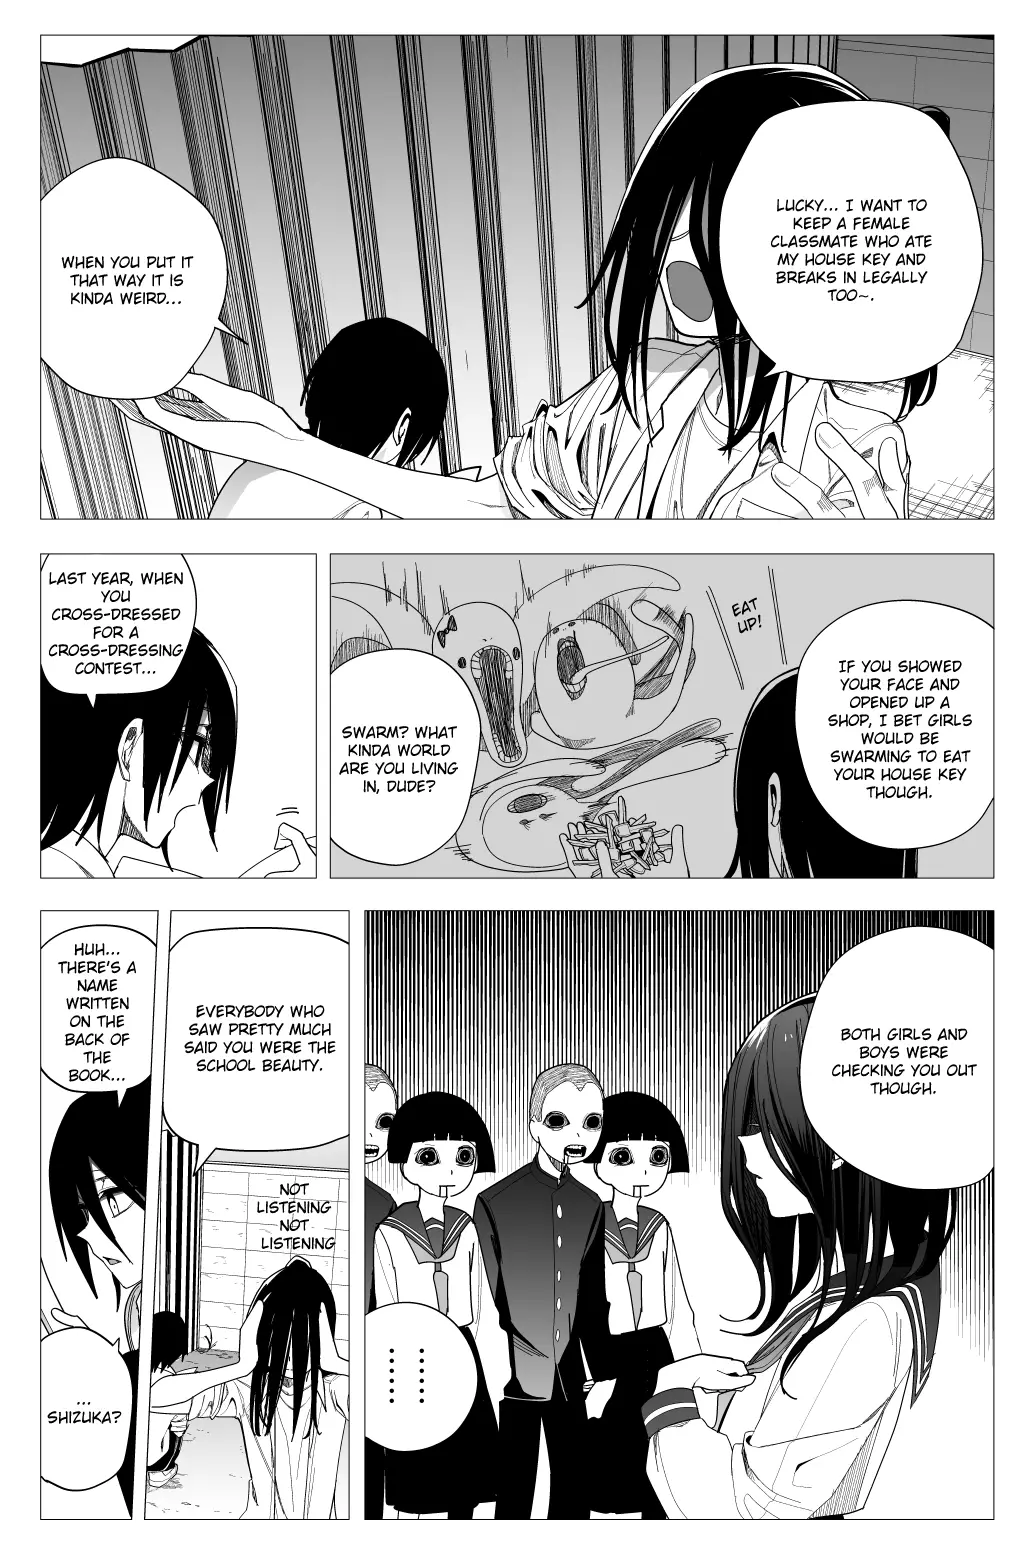 Mitsuishi-San Is Being Weird This Year - 27 page 4-fc53864e